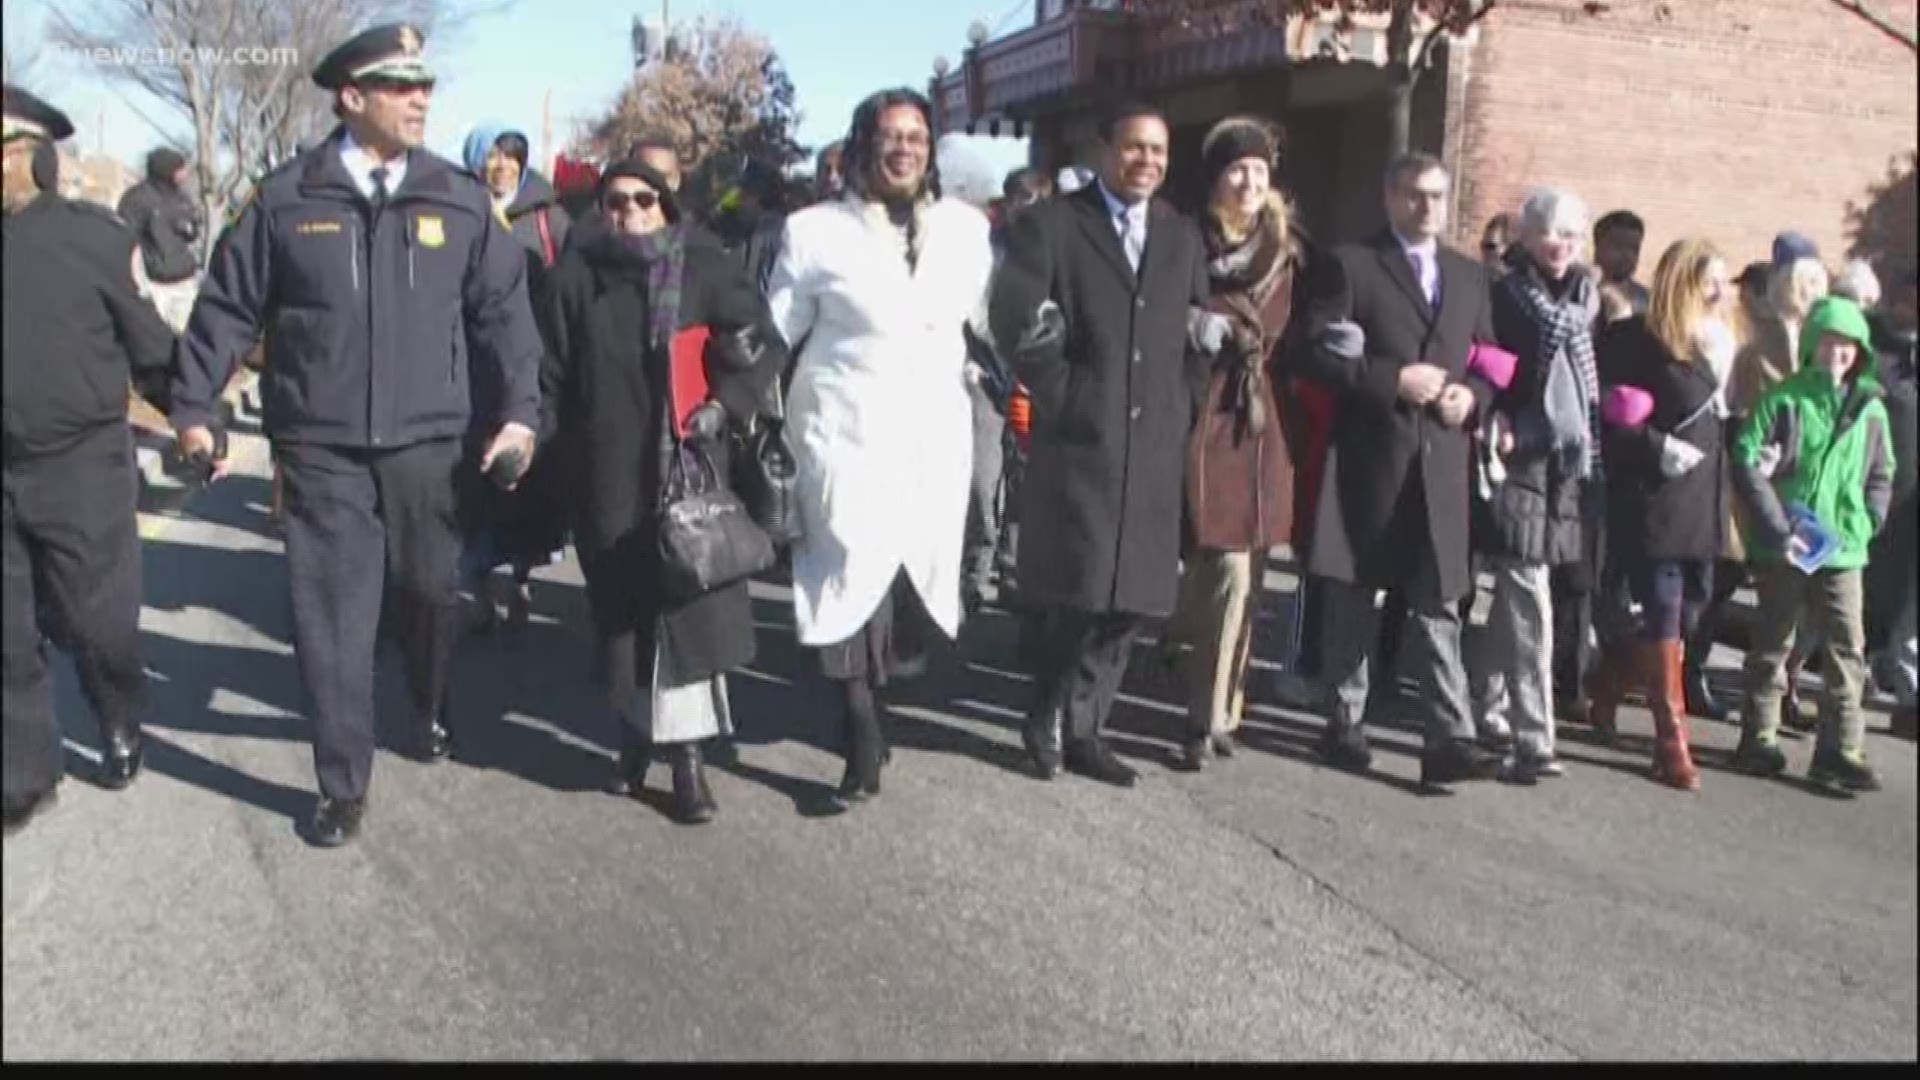 People in Norfolk remembered Dr. Martin Luther King, Jr. with a ceremony and singing while they marched to the memorial.